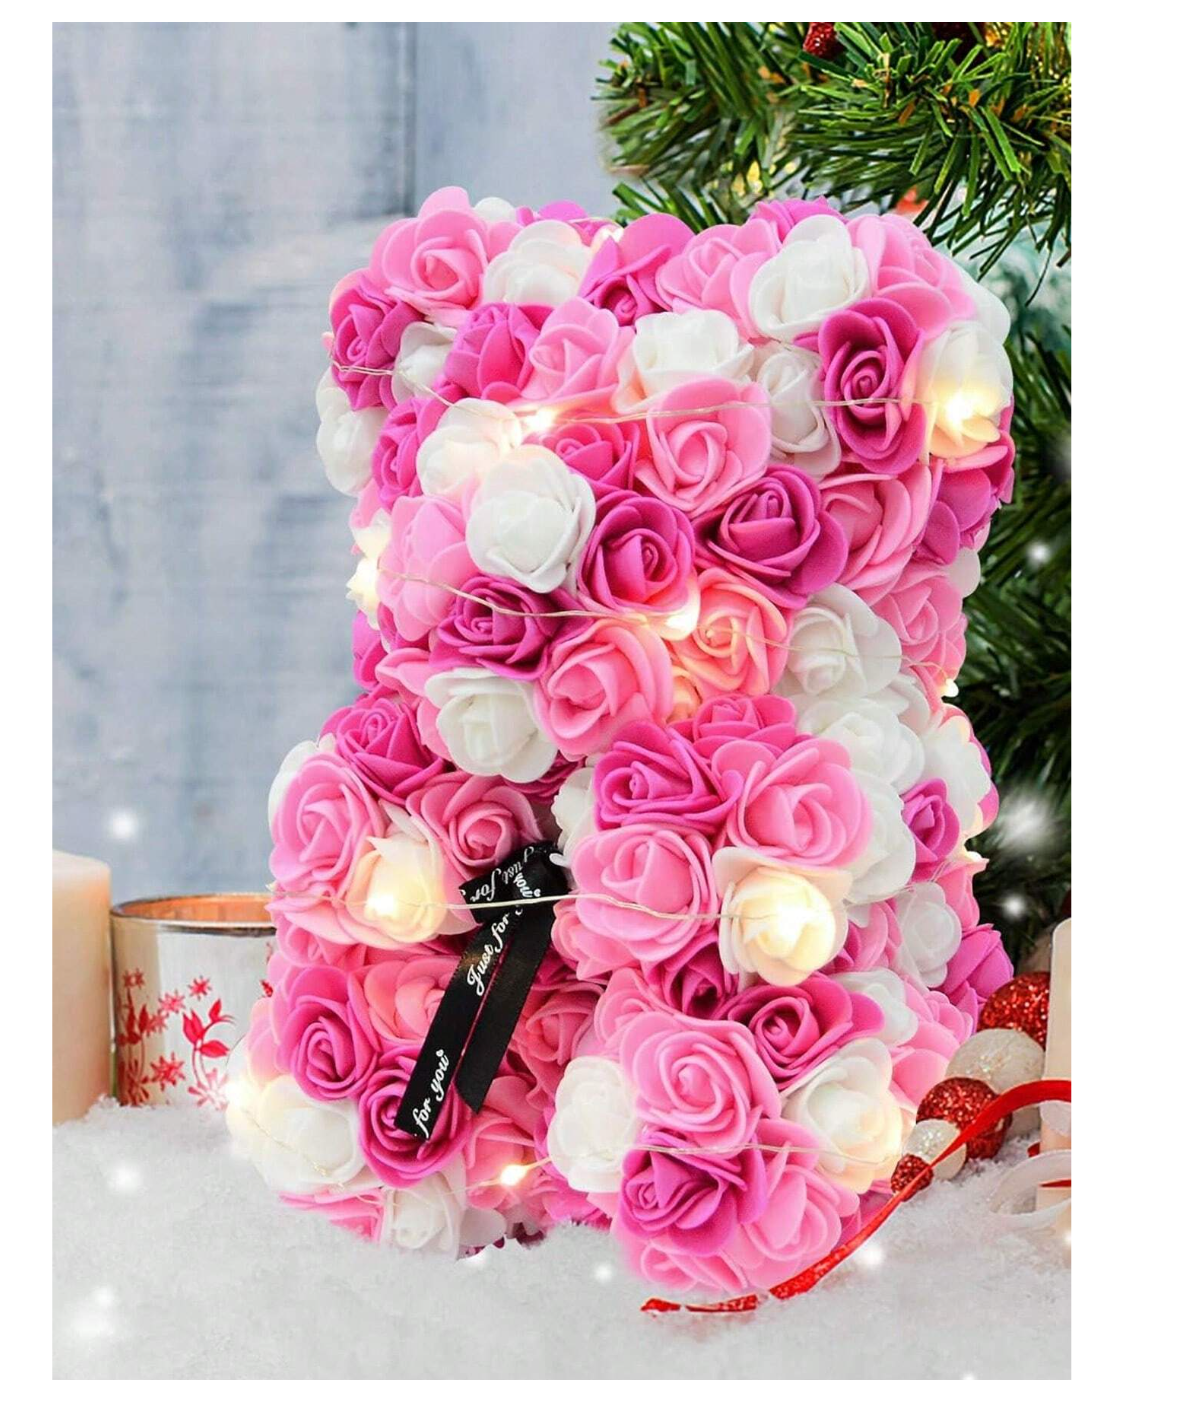 Embrace Forever: Enchanting Valentine's Day Gift - Eternal Rose Bear Crafted with Creative PE Foam Flowers